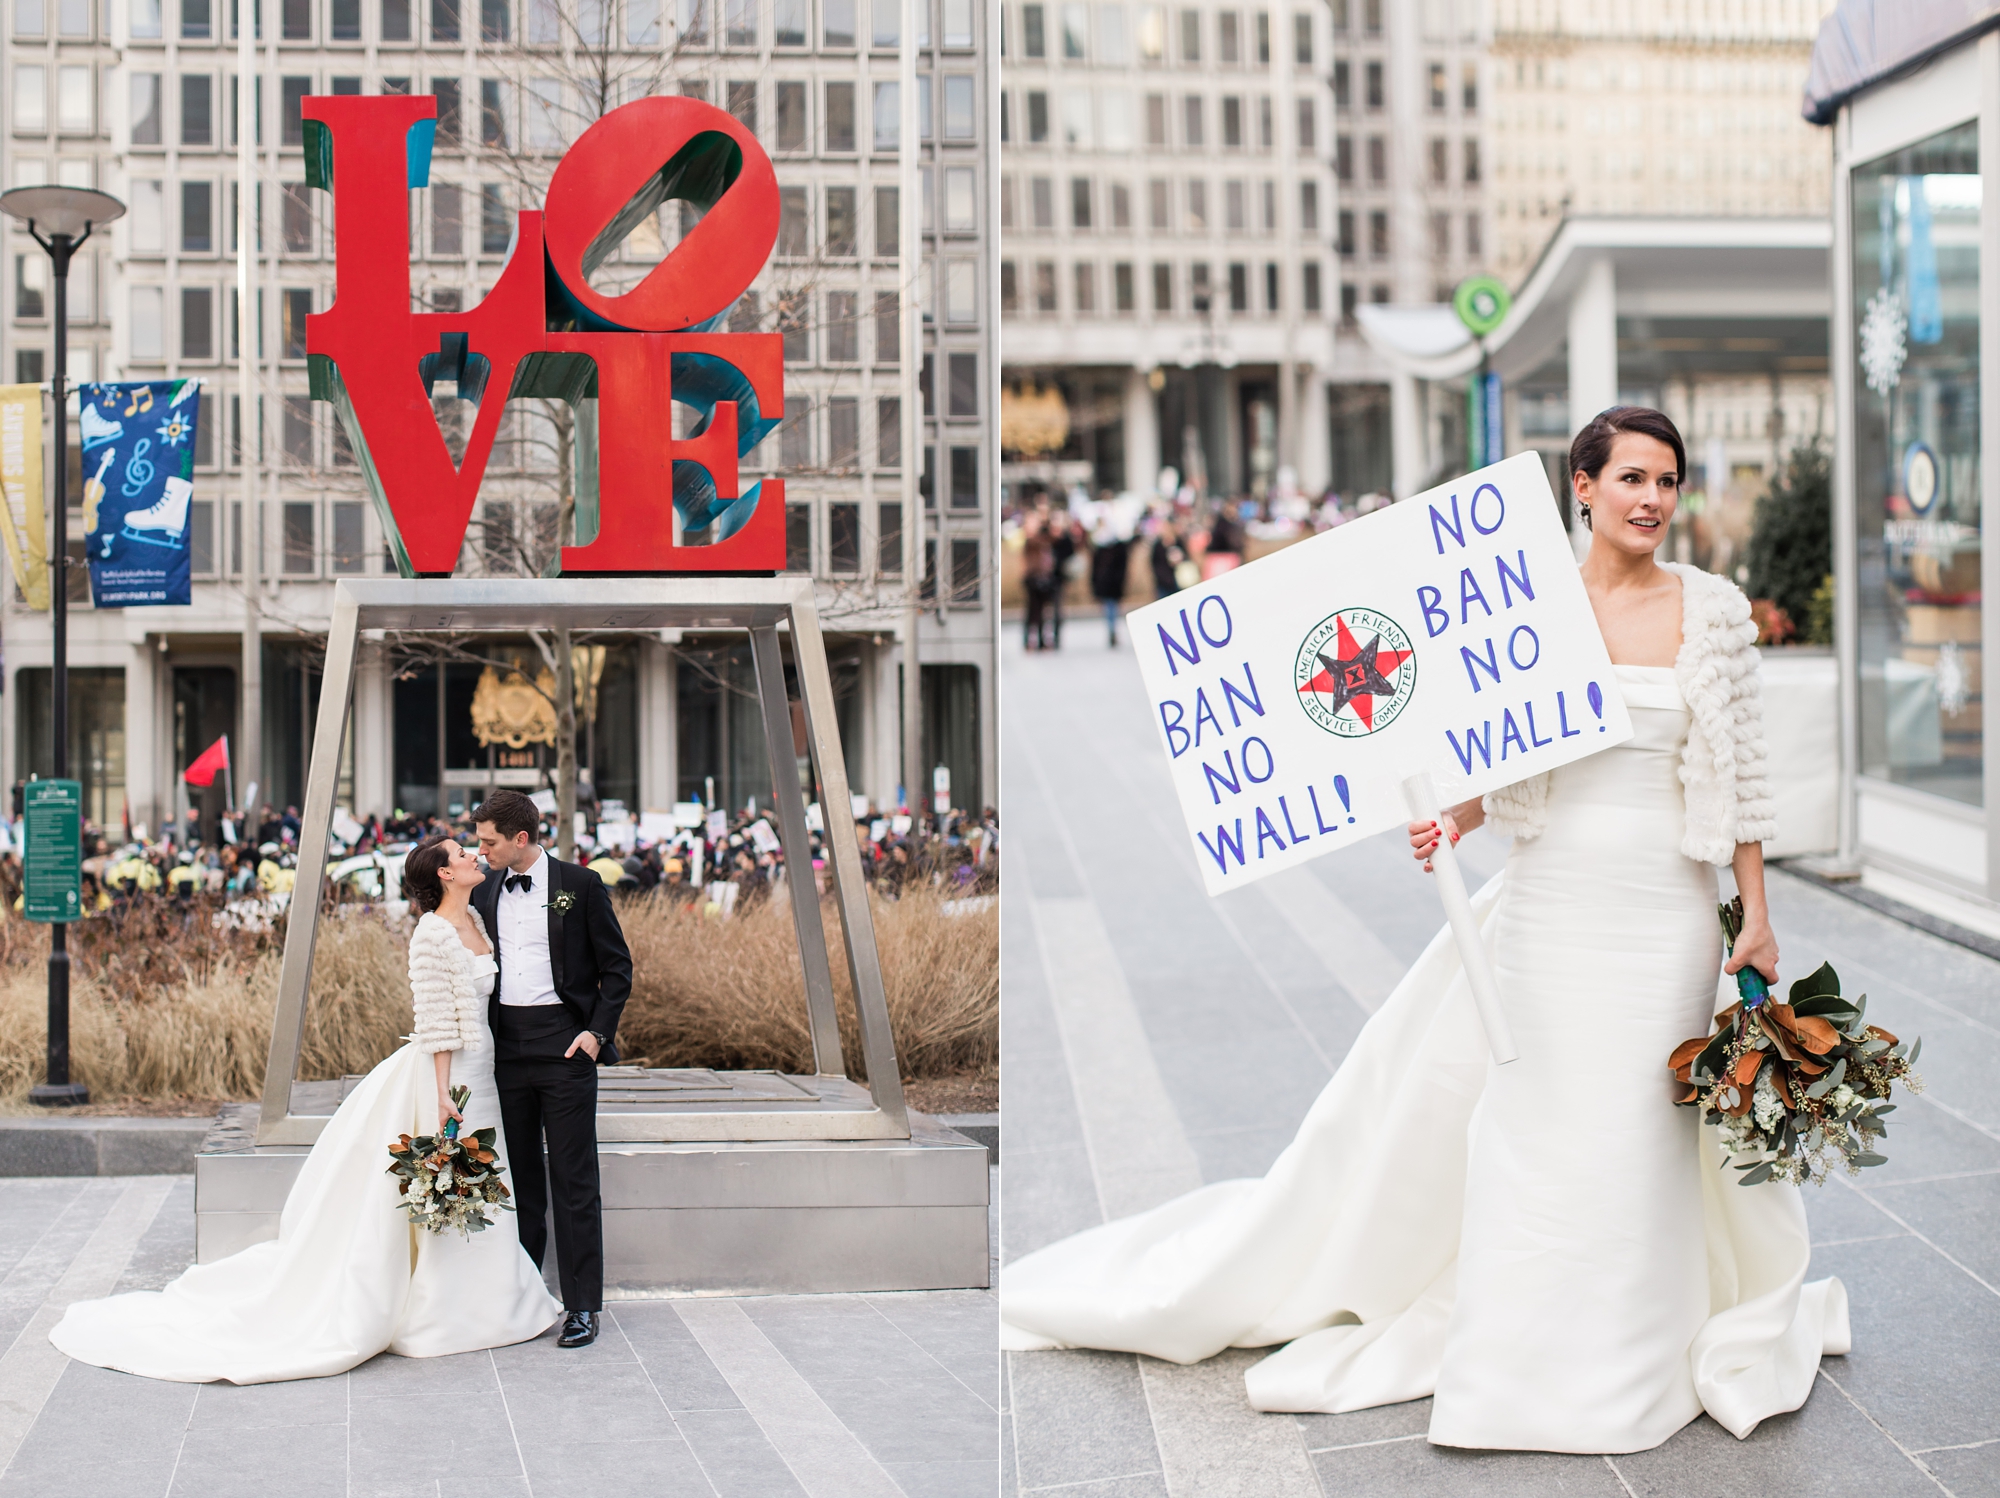 Philadelphia Center City Wedding Preview | Cathedral Basilica of SS Peter and Paul and Crystal Tea Room Wedding | Nan and Dan